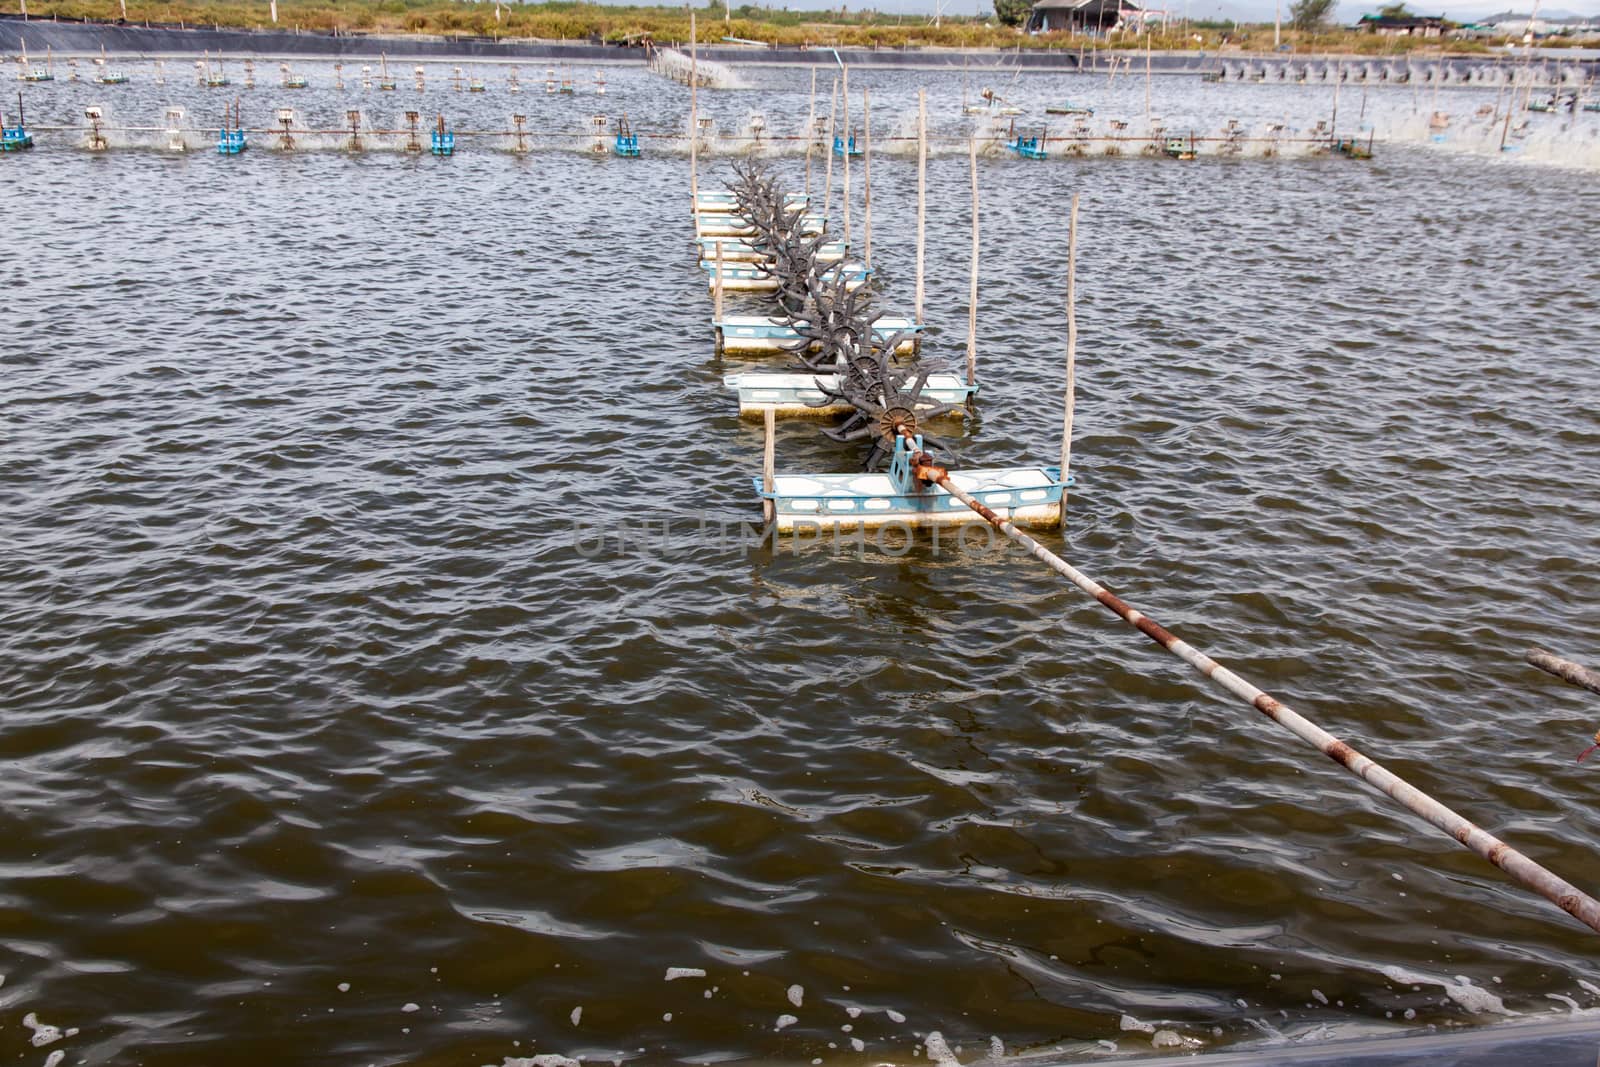 Paddle wheel aerator in Shrimp farming closed system. Supplying the Water with Fresh Oxygen. Natural Water Treatment.